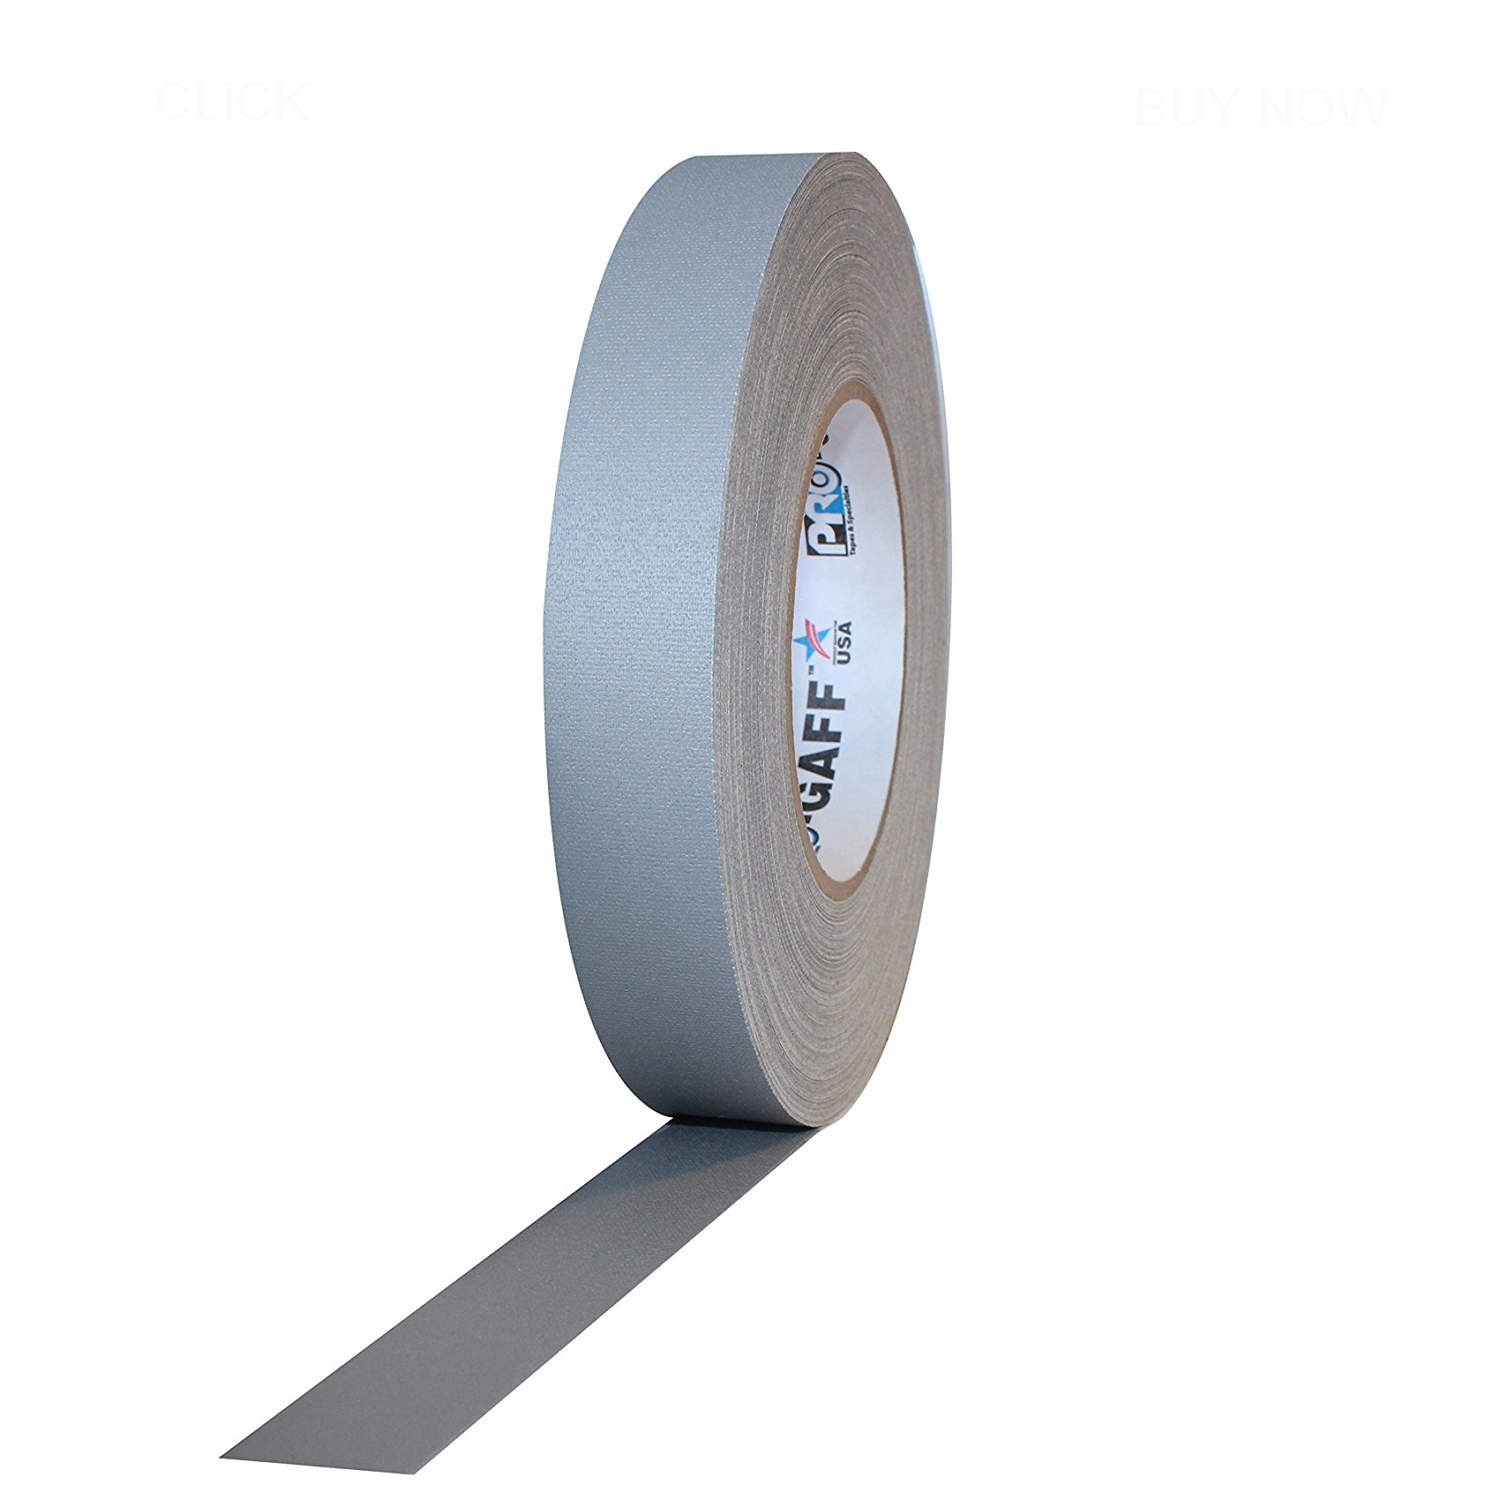 Gaffer Power Real Professional Grade Gaffer Tape, Made in The USA, Heavy  Duty Gaffers Tape, Non-Reflective, Multipurpose. 2 Inches x 30 Yards, Grey